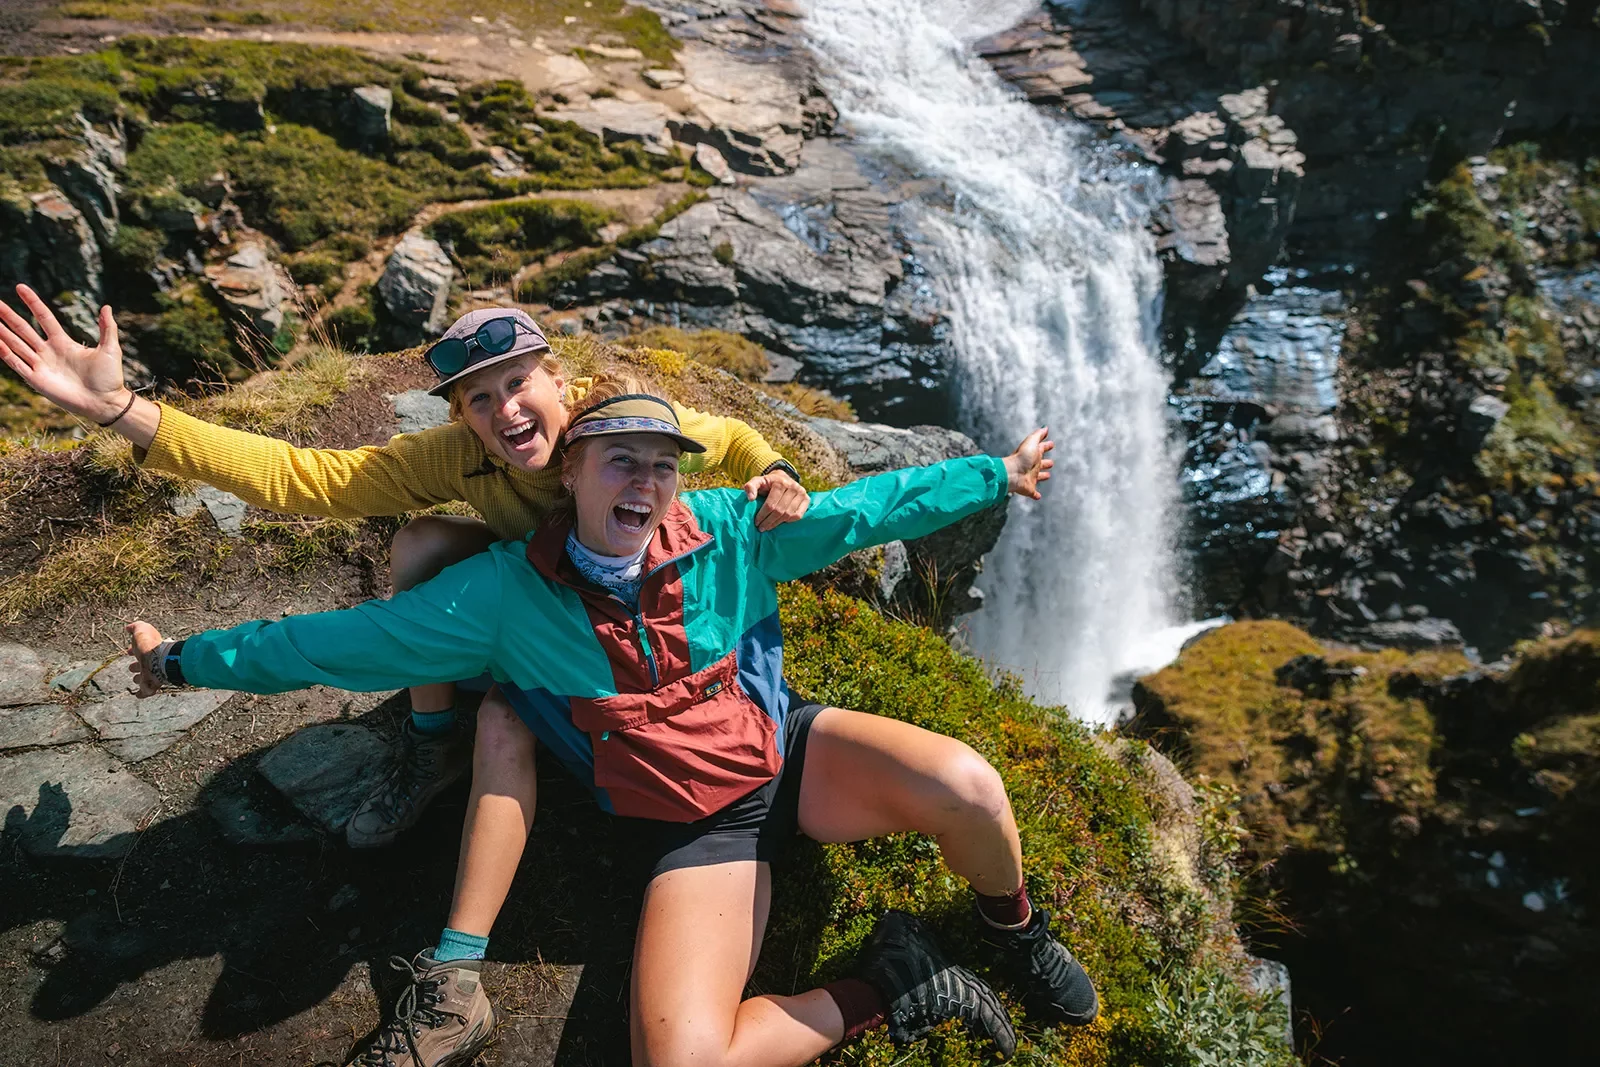 Two women with their arms open on a cliff with a waterfall below